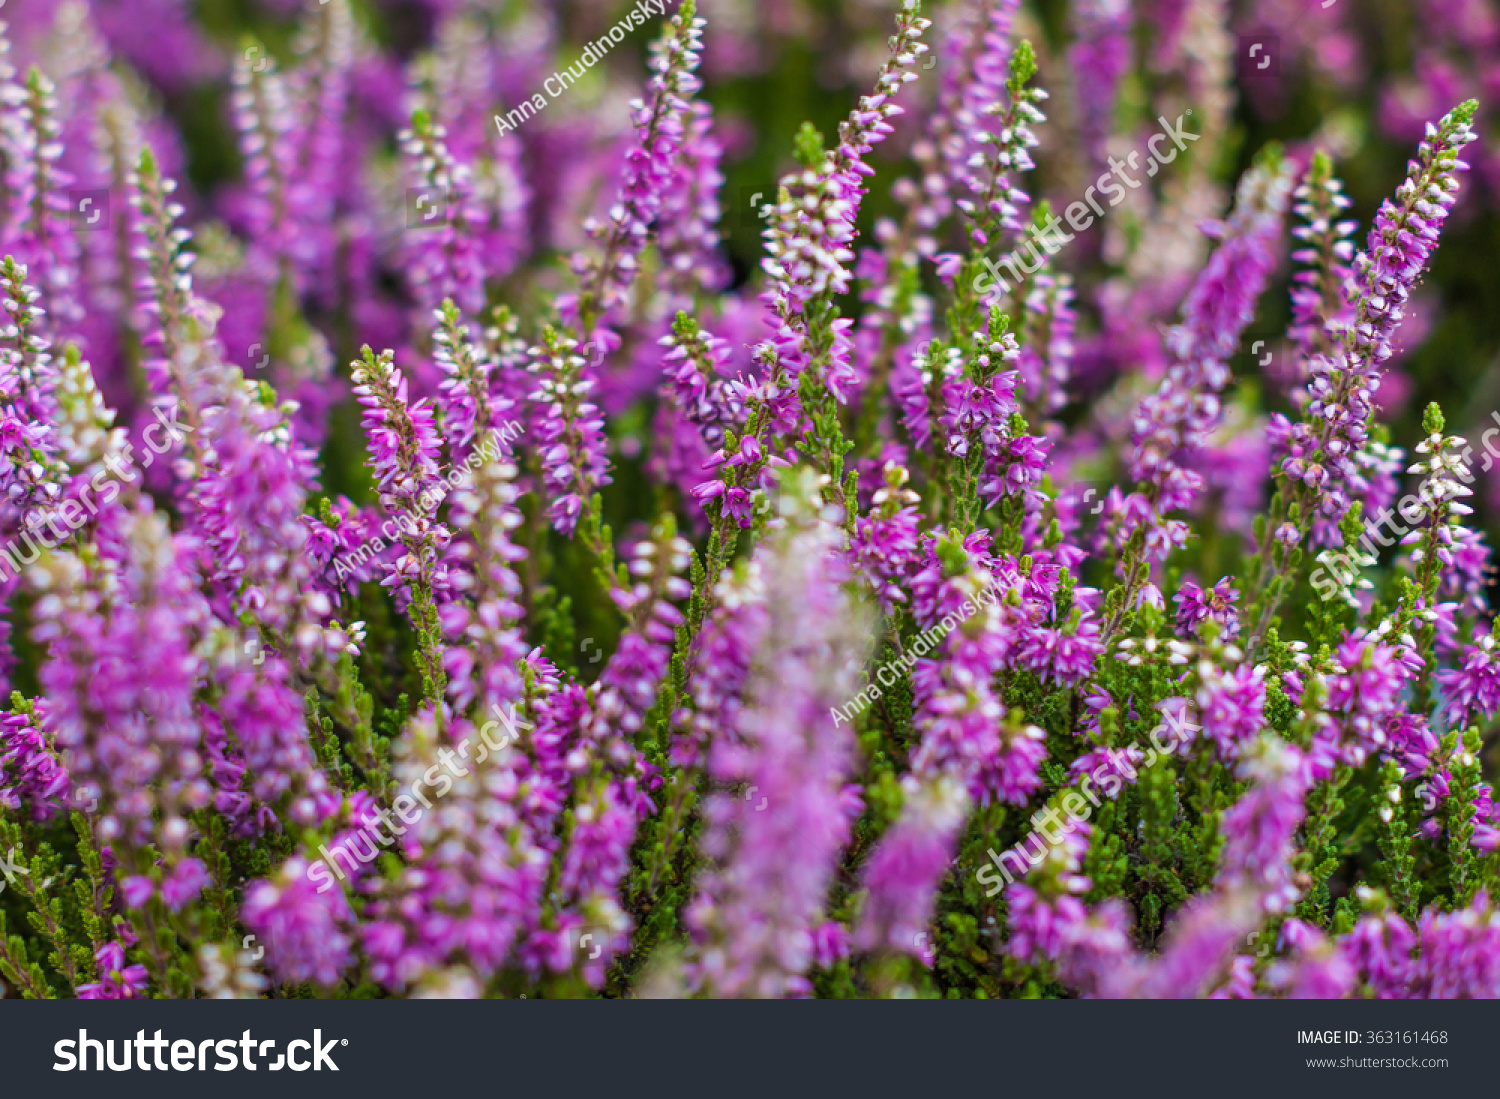 Field of pink heather #363161468